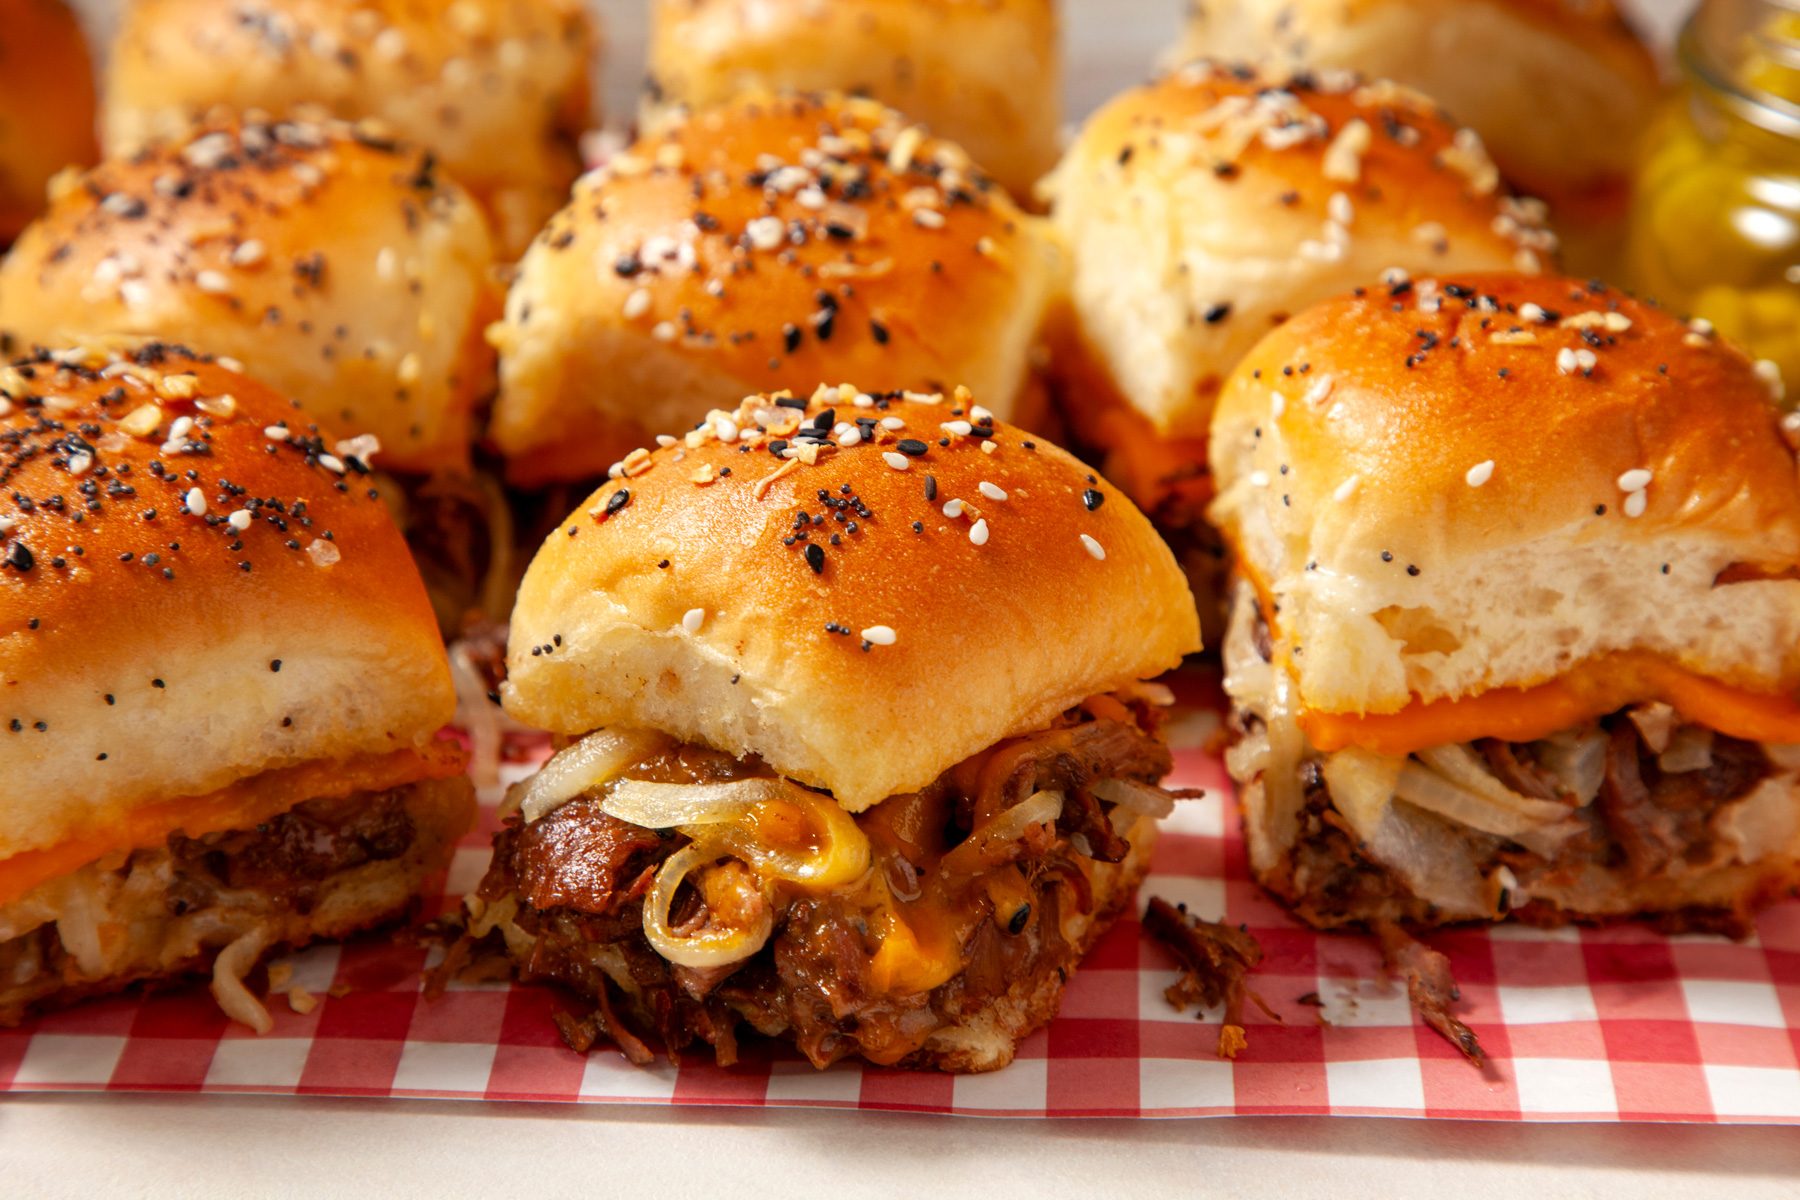 A group of roast beef sliders on a red and white checkered surface